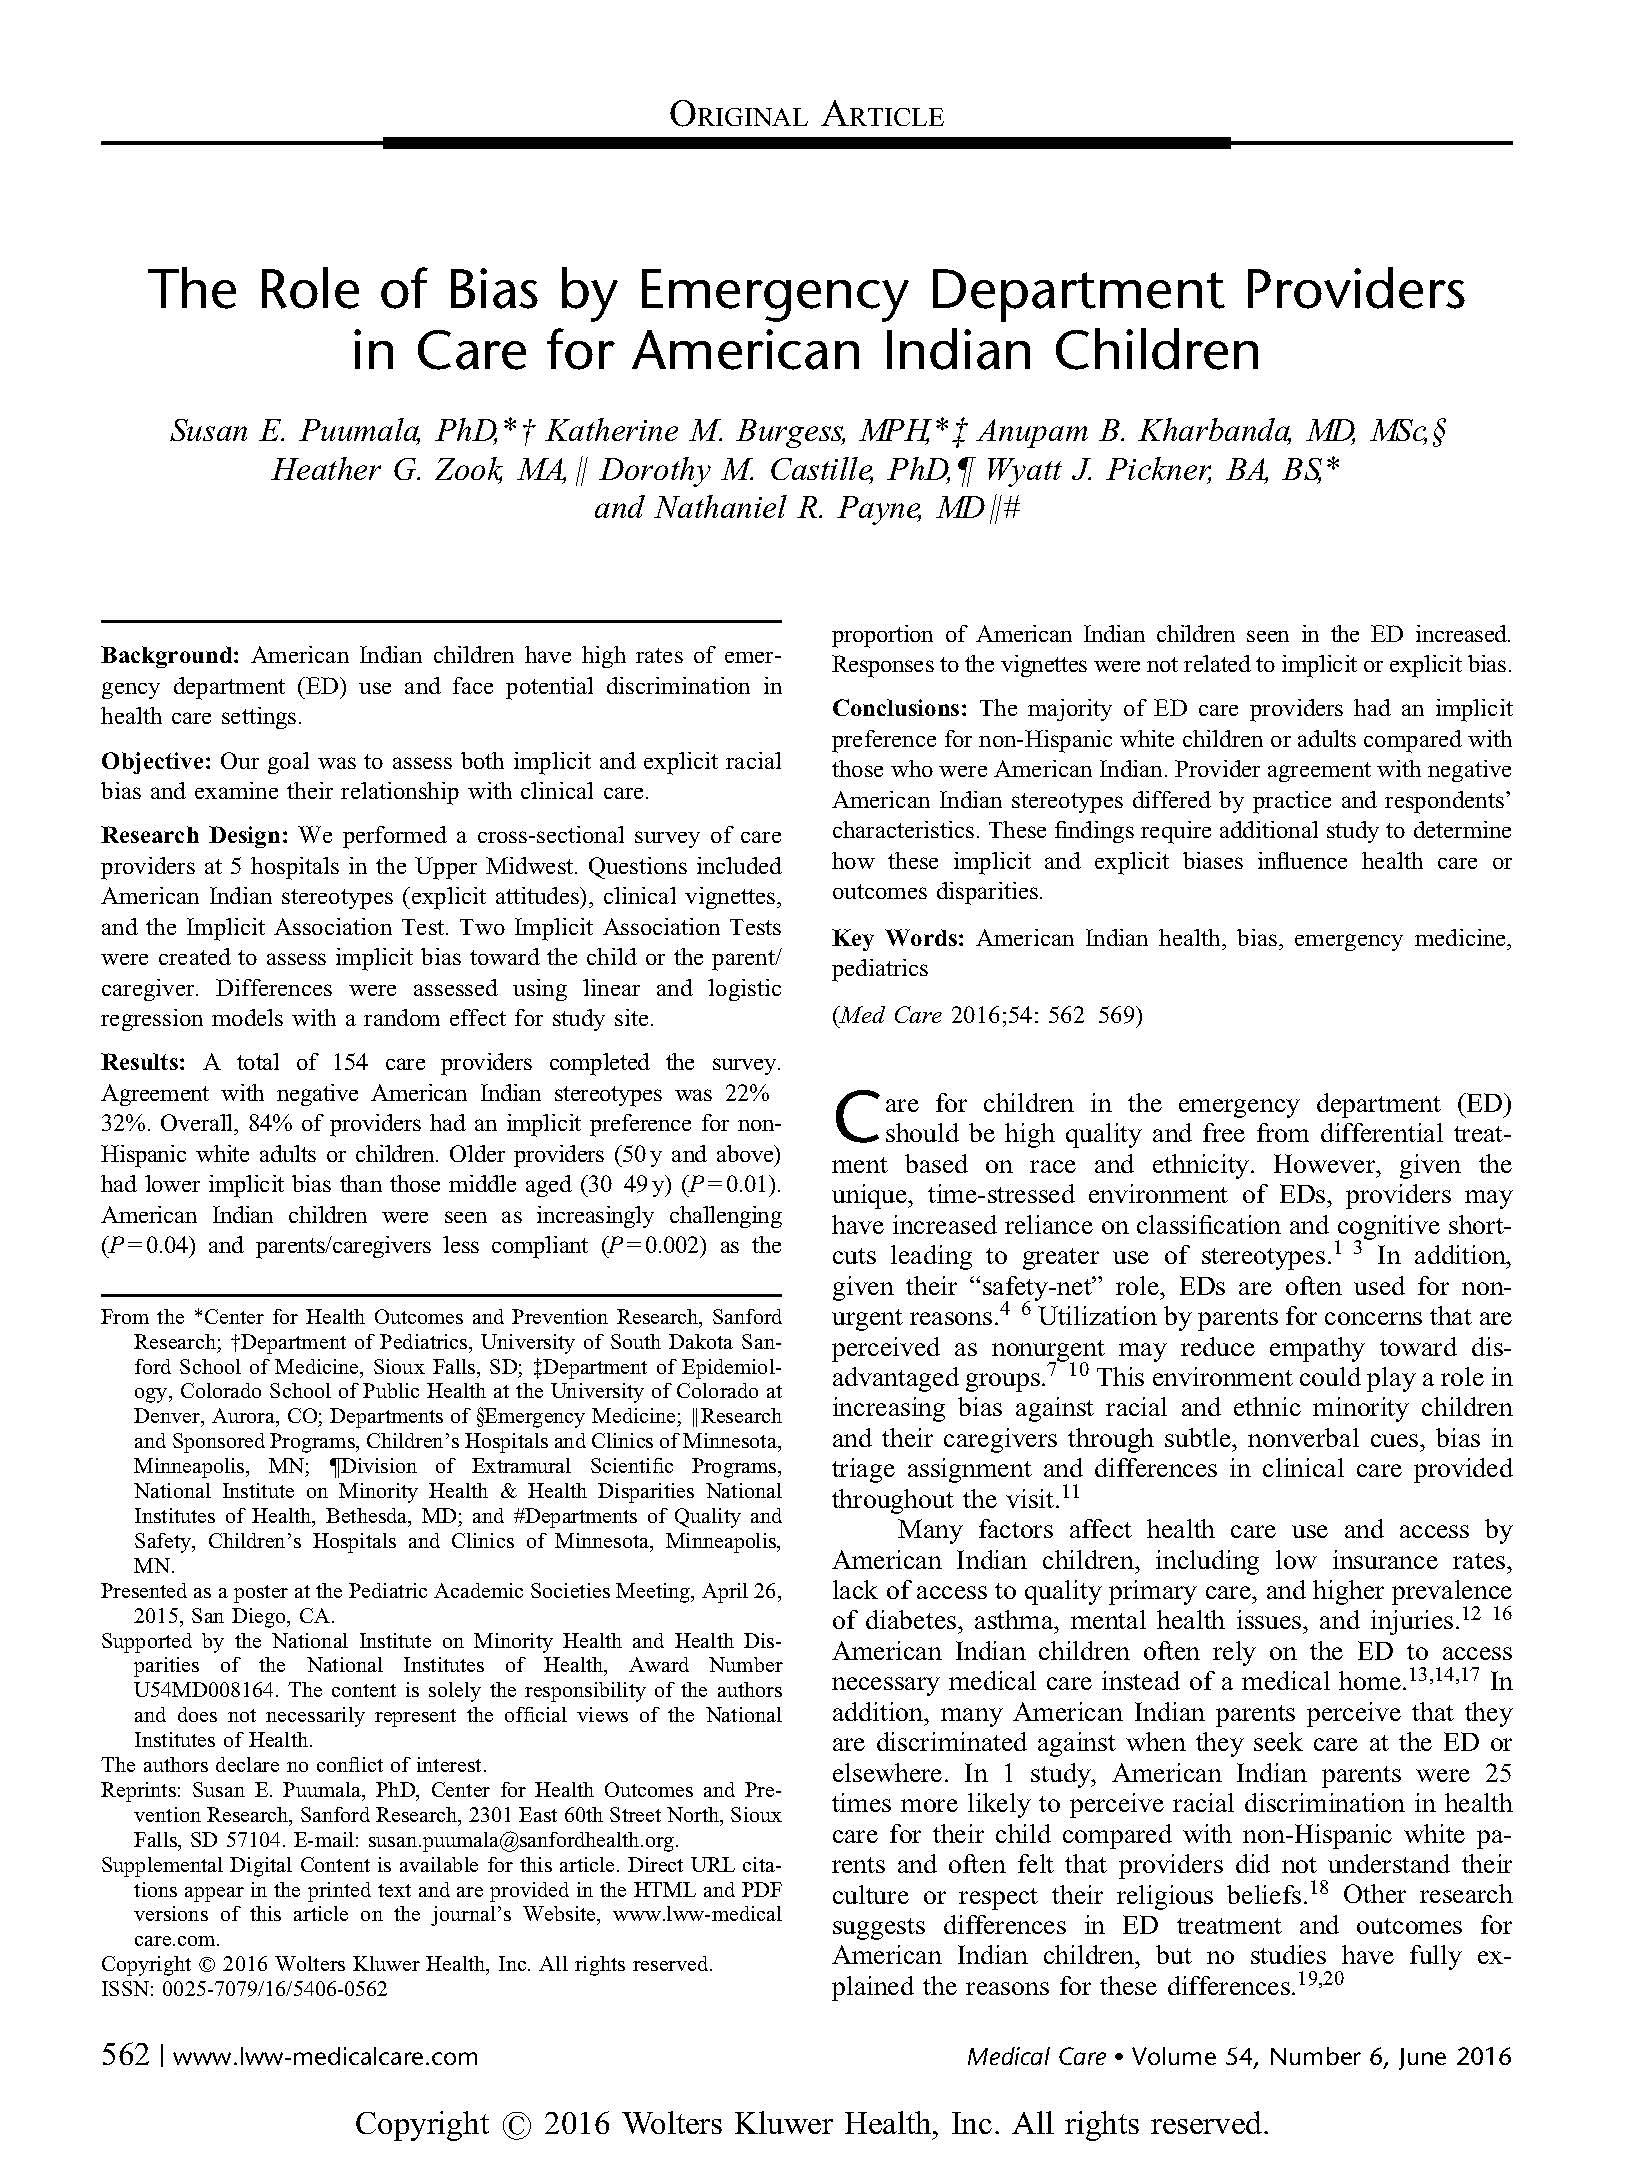 Pages from Puumala The Role of Bias by Emergency Department Providers in Care for American Indian Children